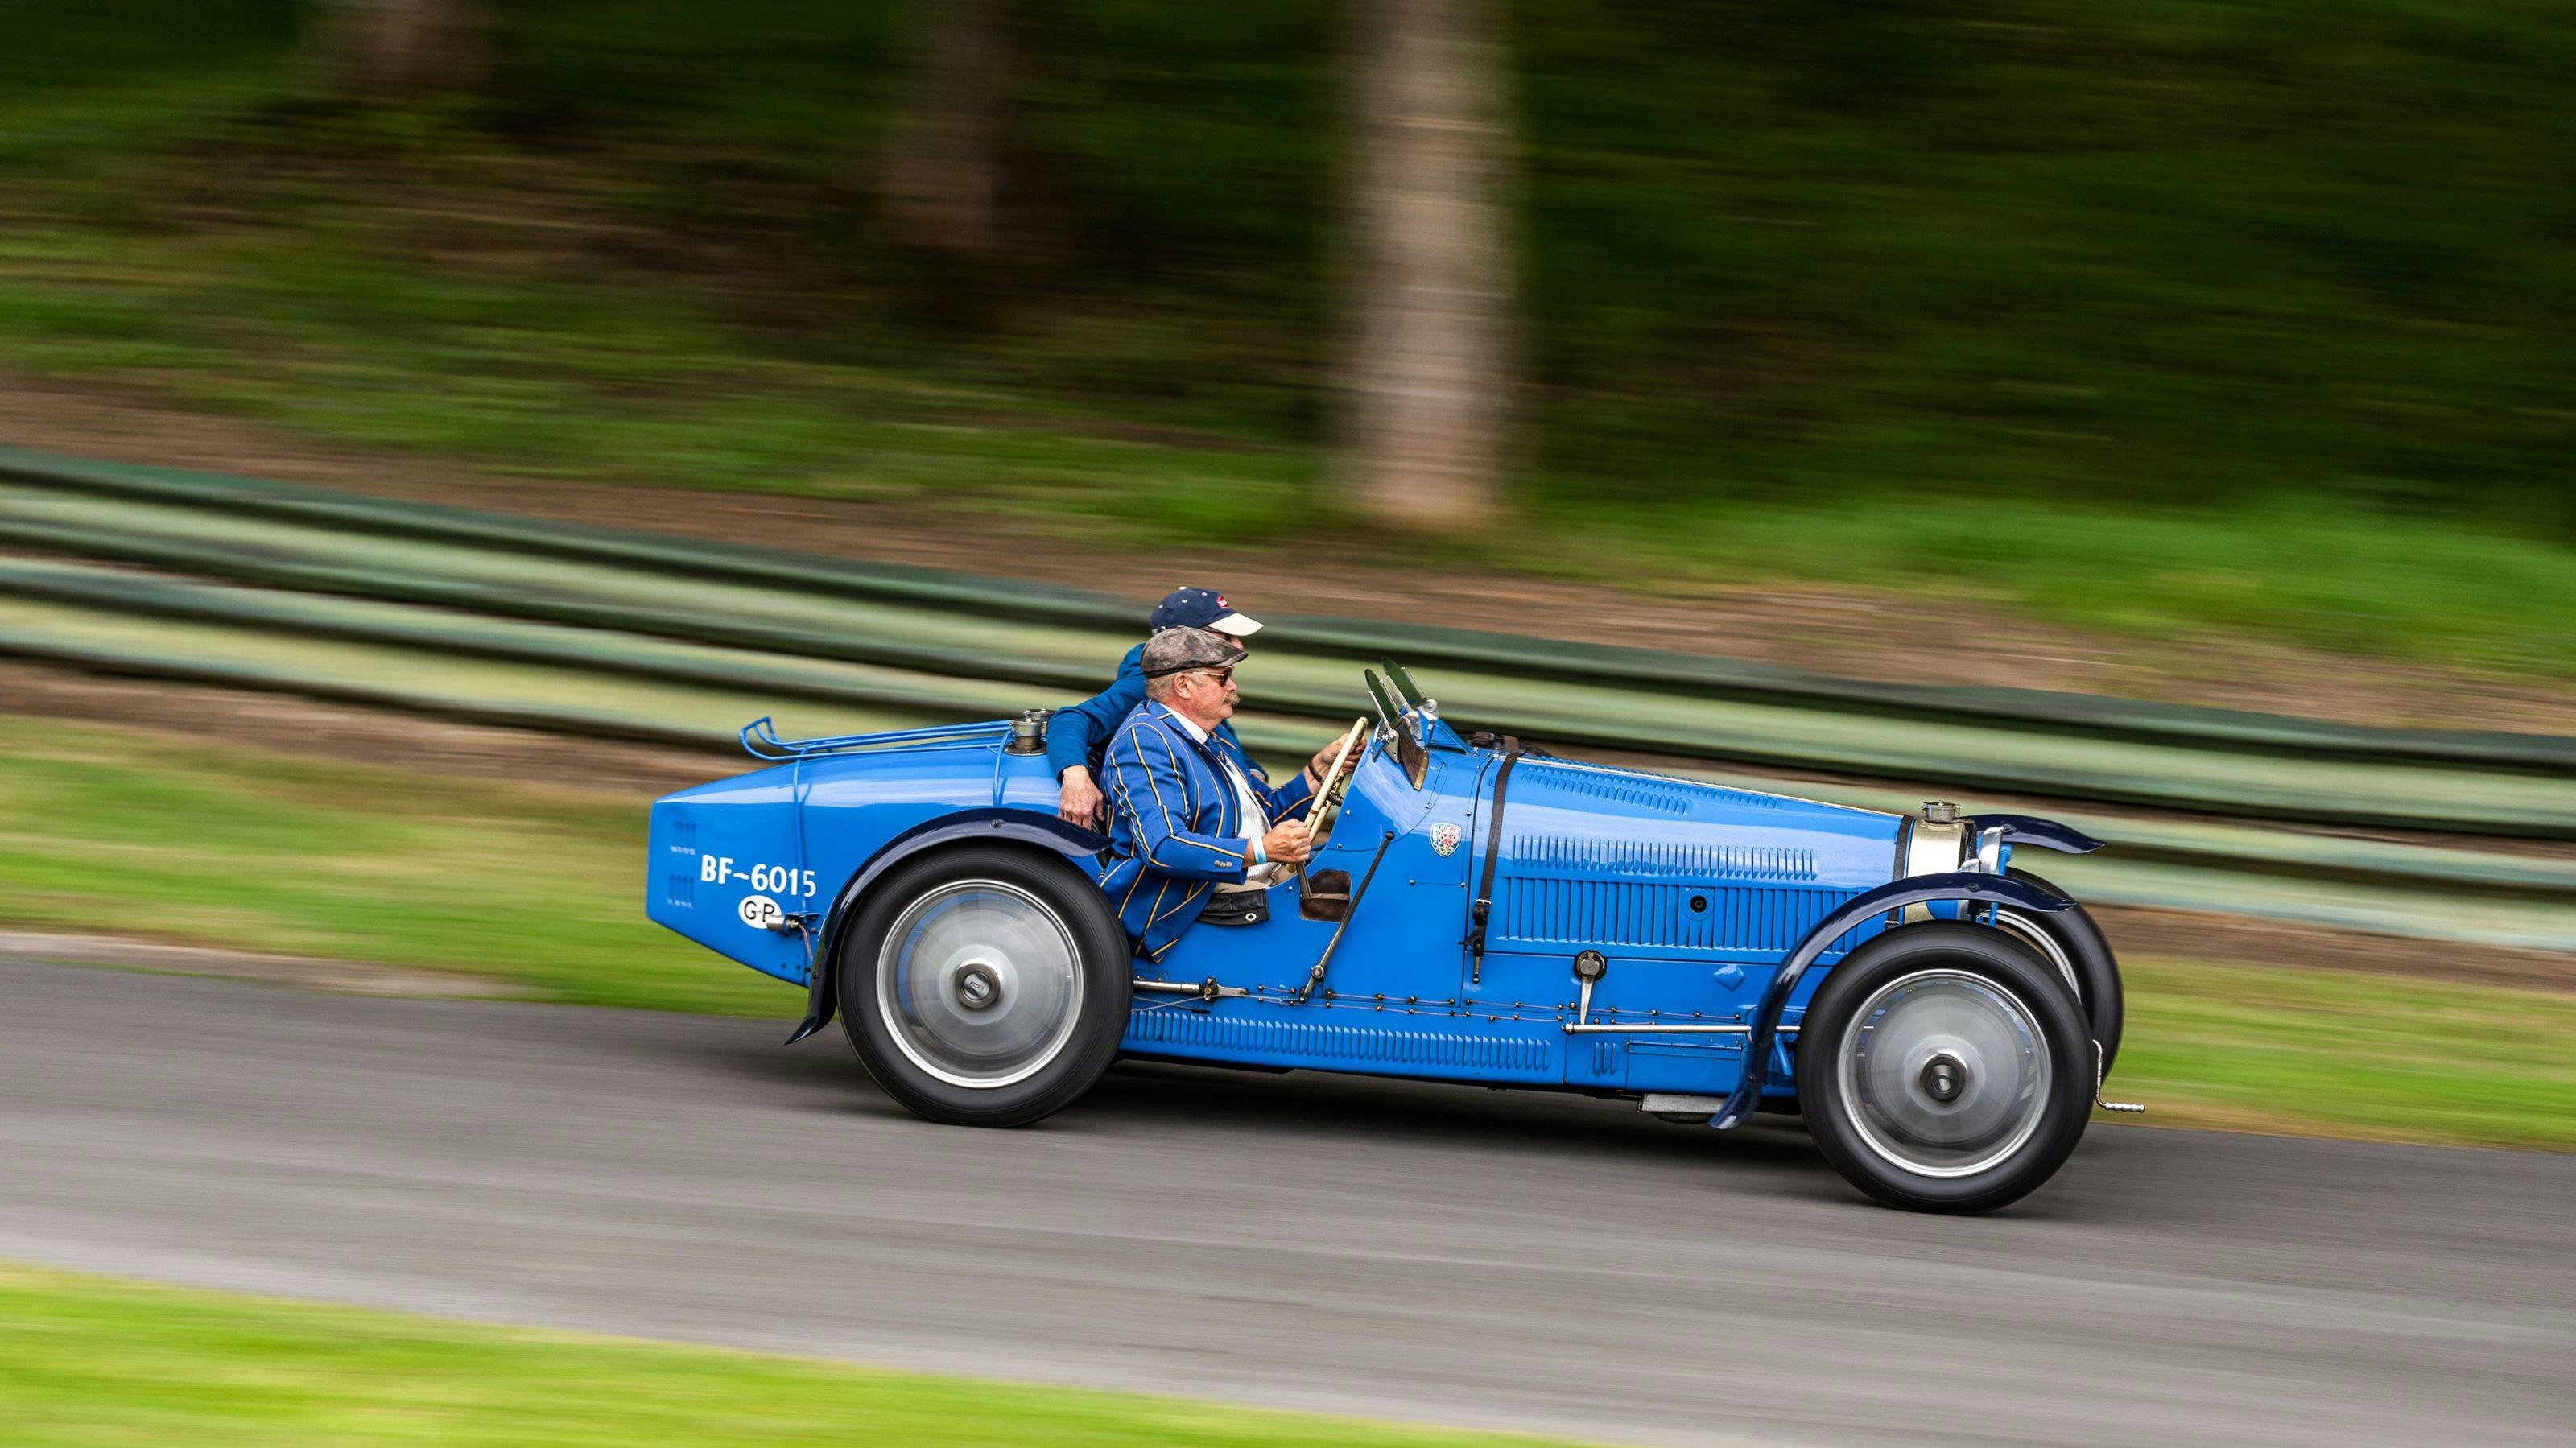 The Spiritual Home of Bugatti in England For More Than 90 Years